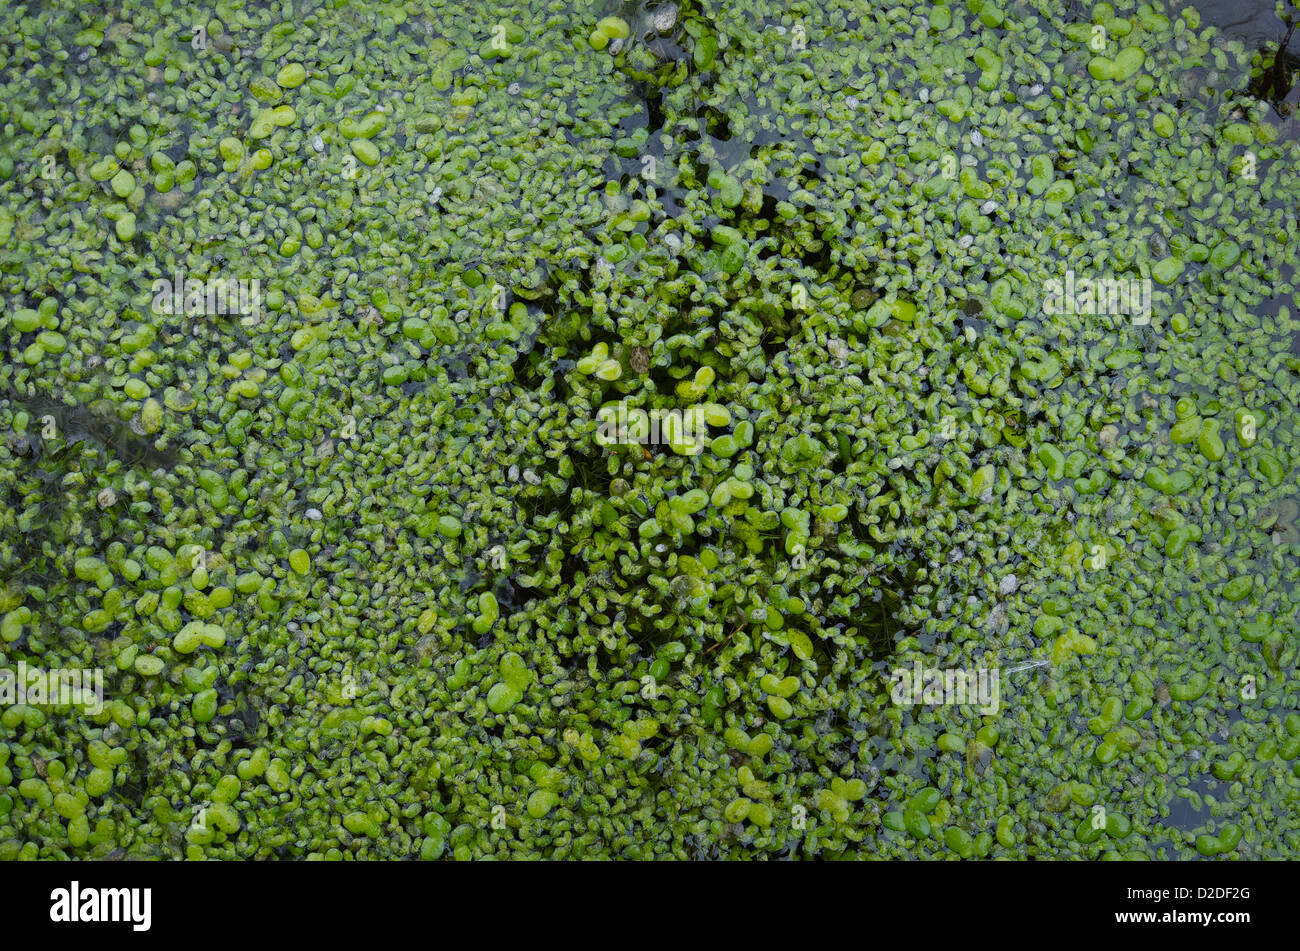 Pond surface coated with dense covering of duckweed Lemna minuta Stock Photo